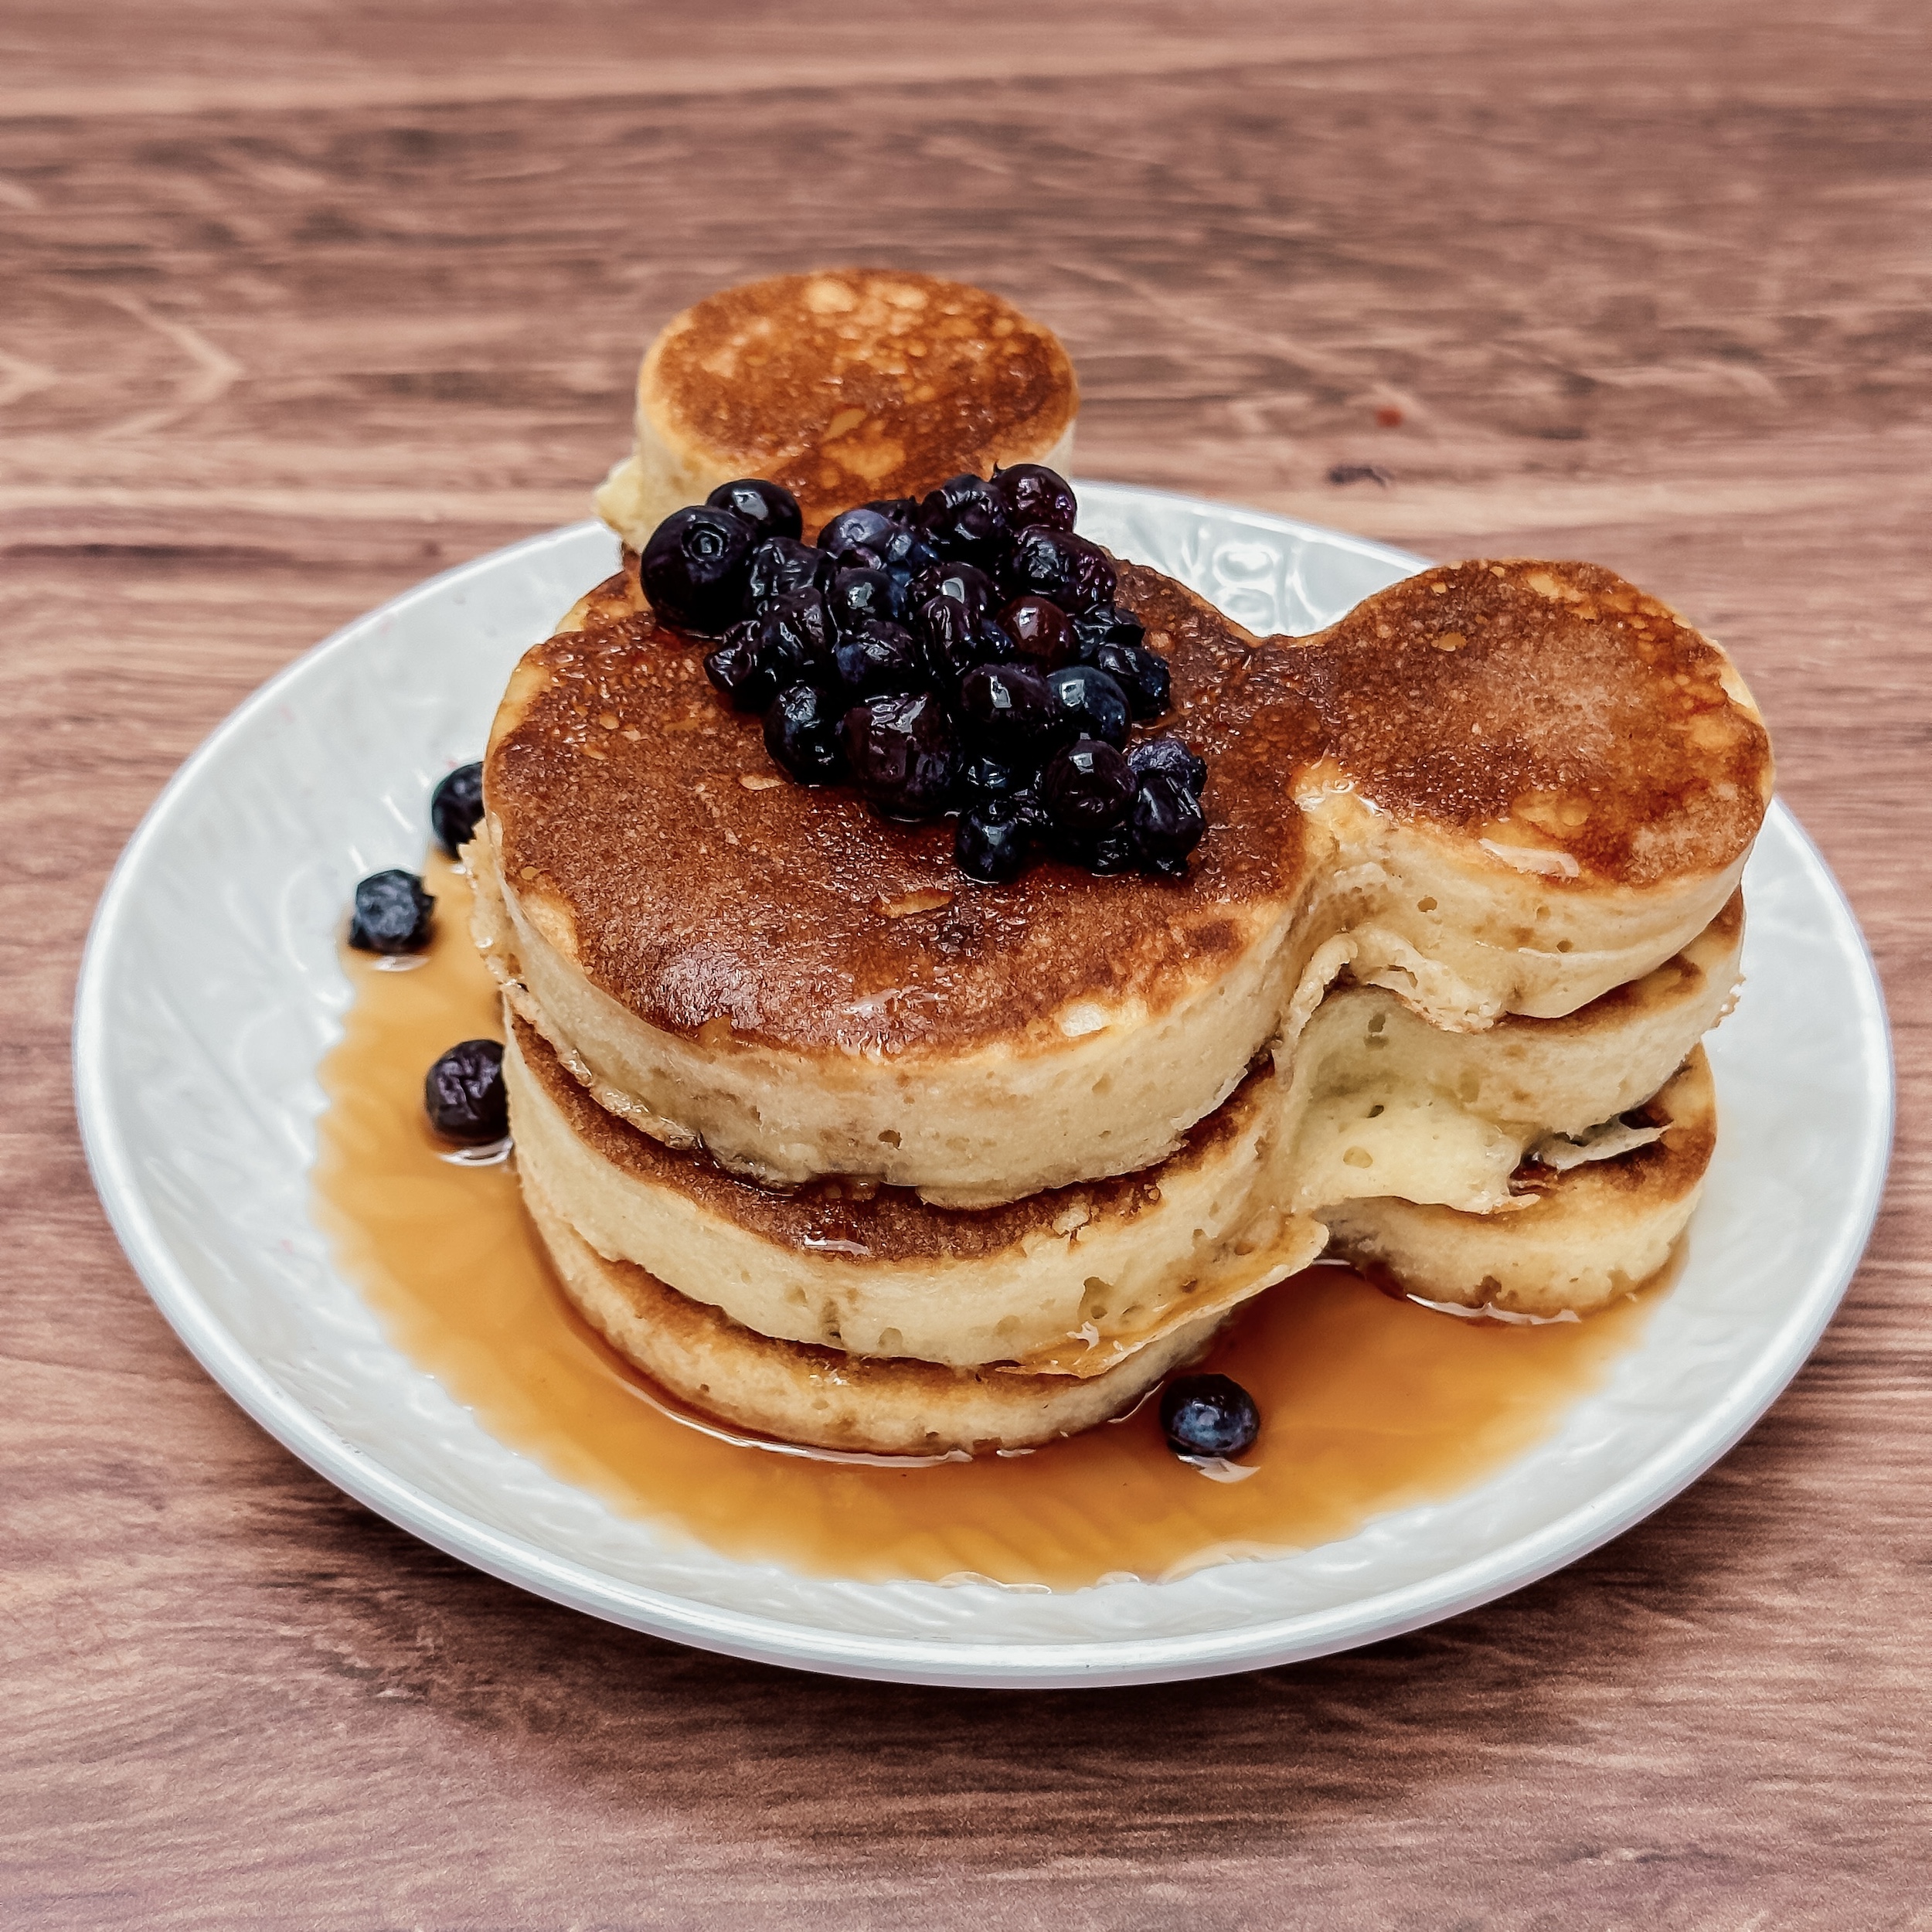 Mickey's Mardi Gras Pancakes (three mickey shaped pancakes on a plate with blueberries and syrup)